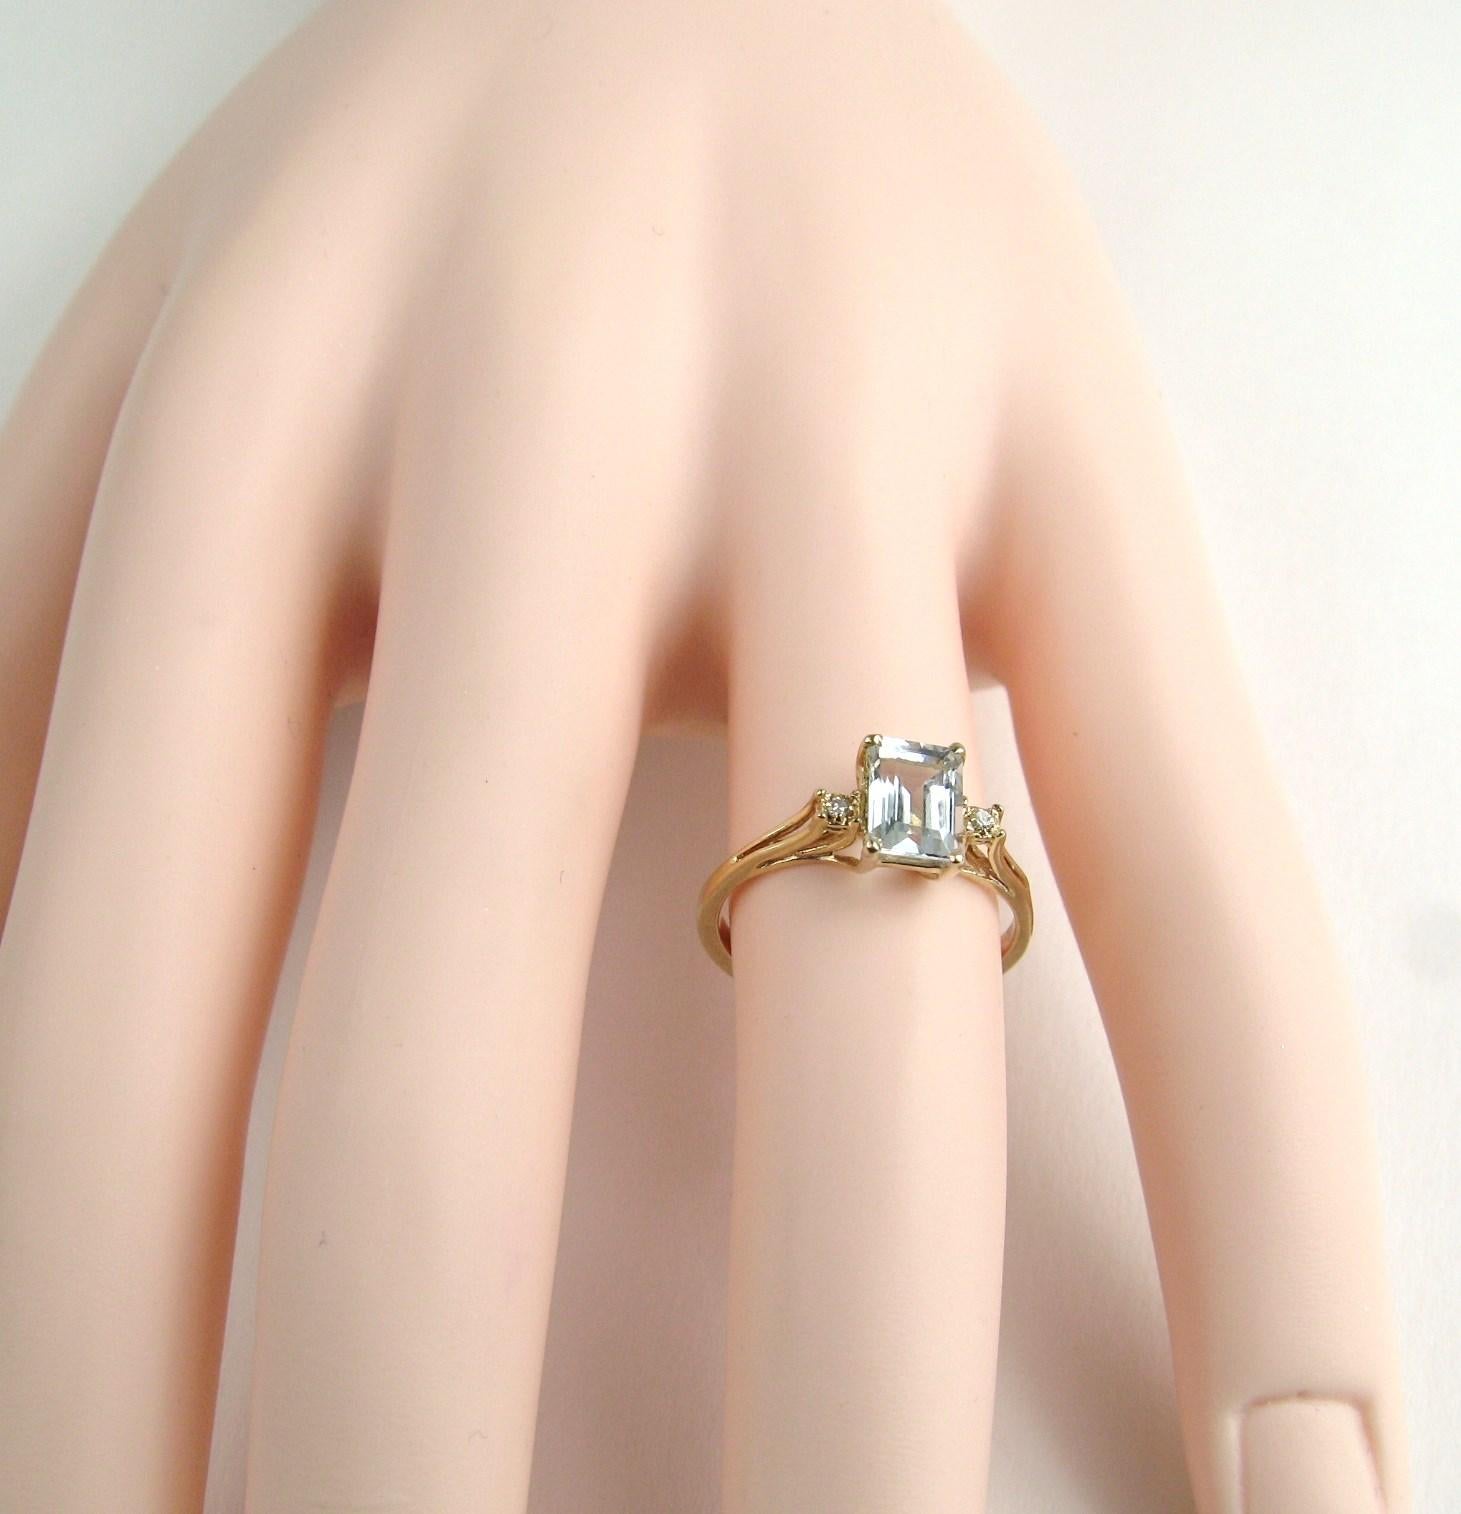 Modernist Aquamarine Diamond Ring 14 Karat In Good Condition For Sale In Wallkill, NY